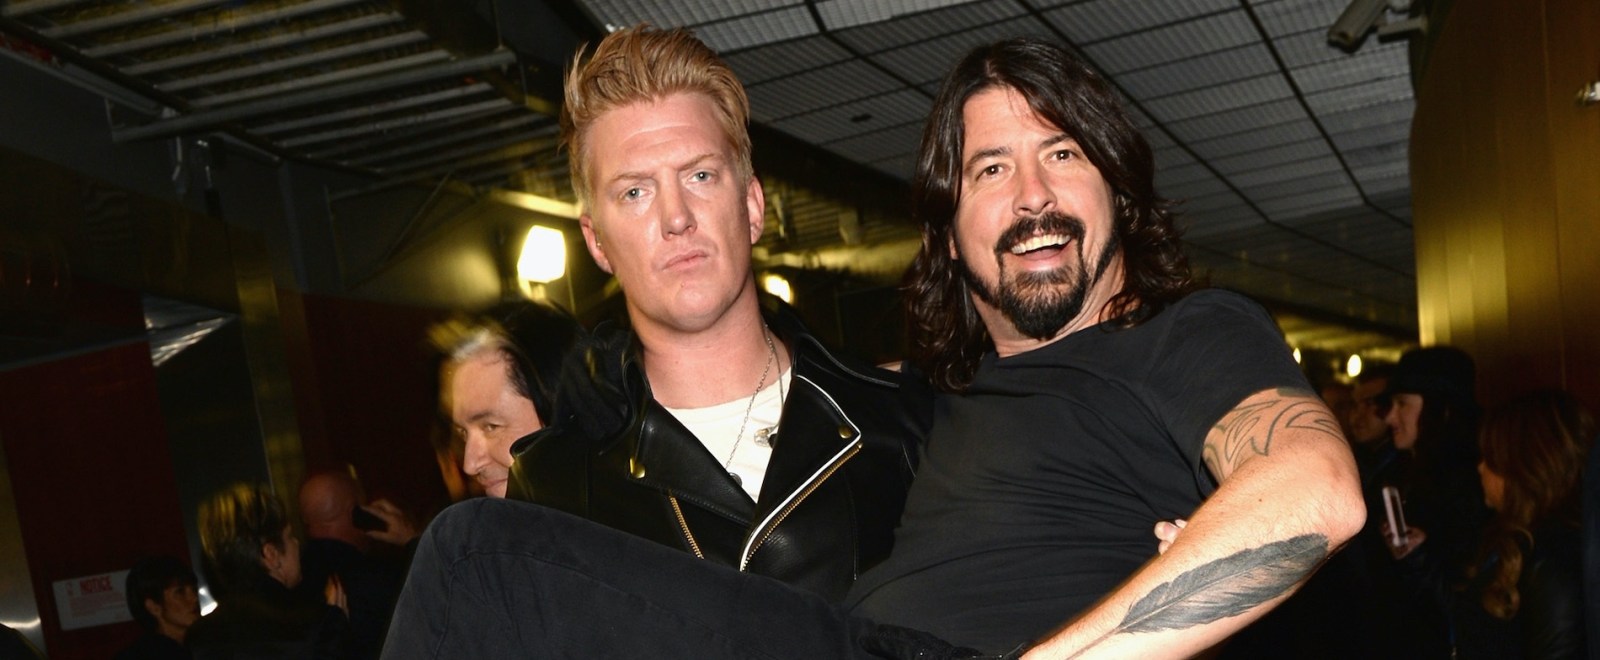 josh-homme-dave-grohl-them-crooked-vultures-getty-full.jpg